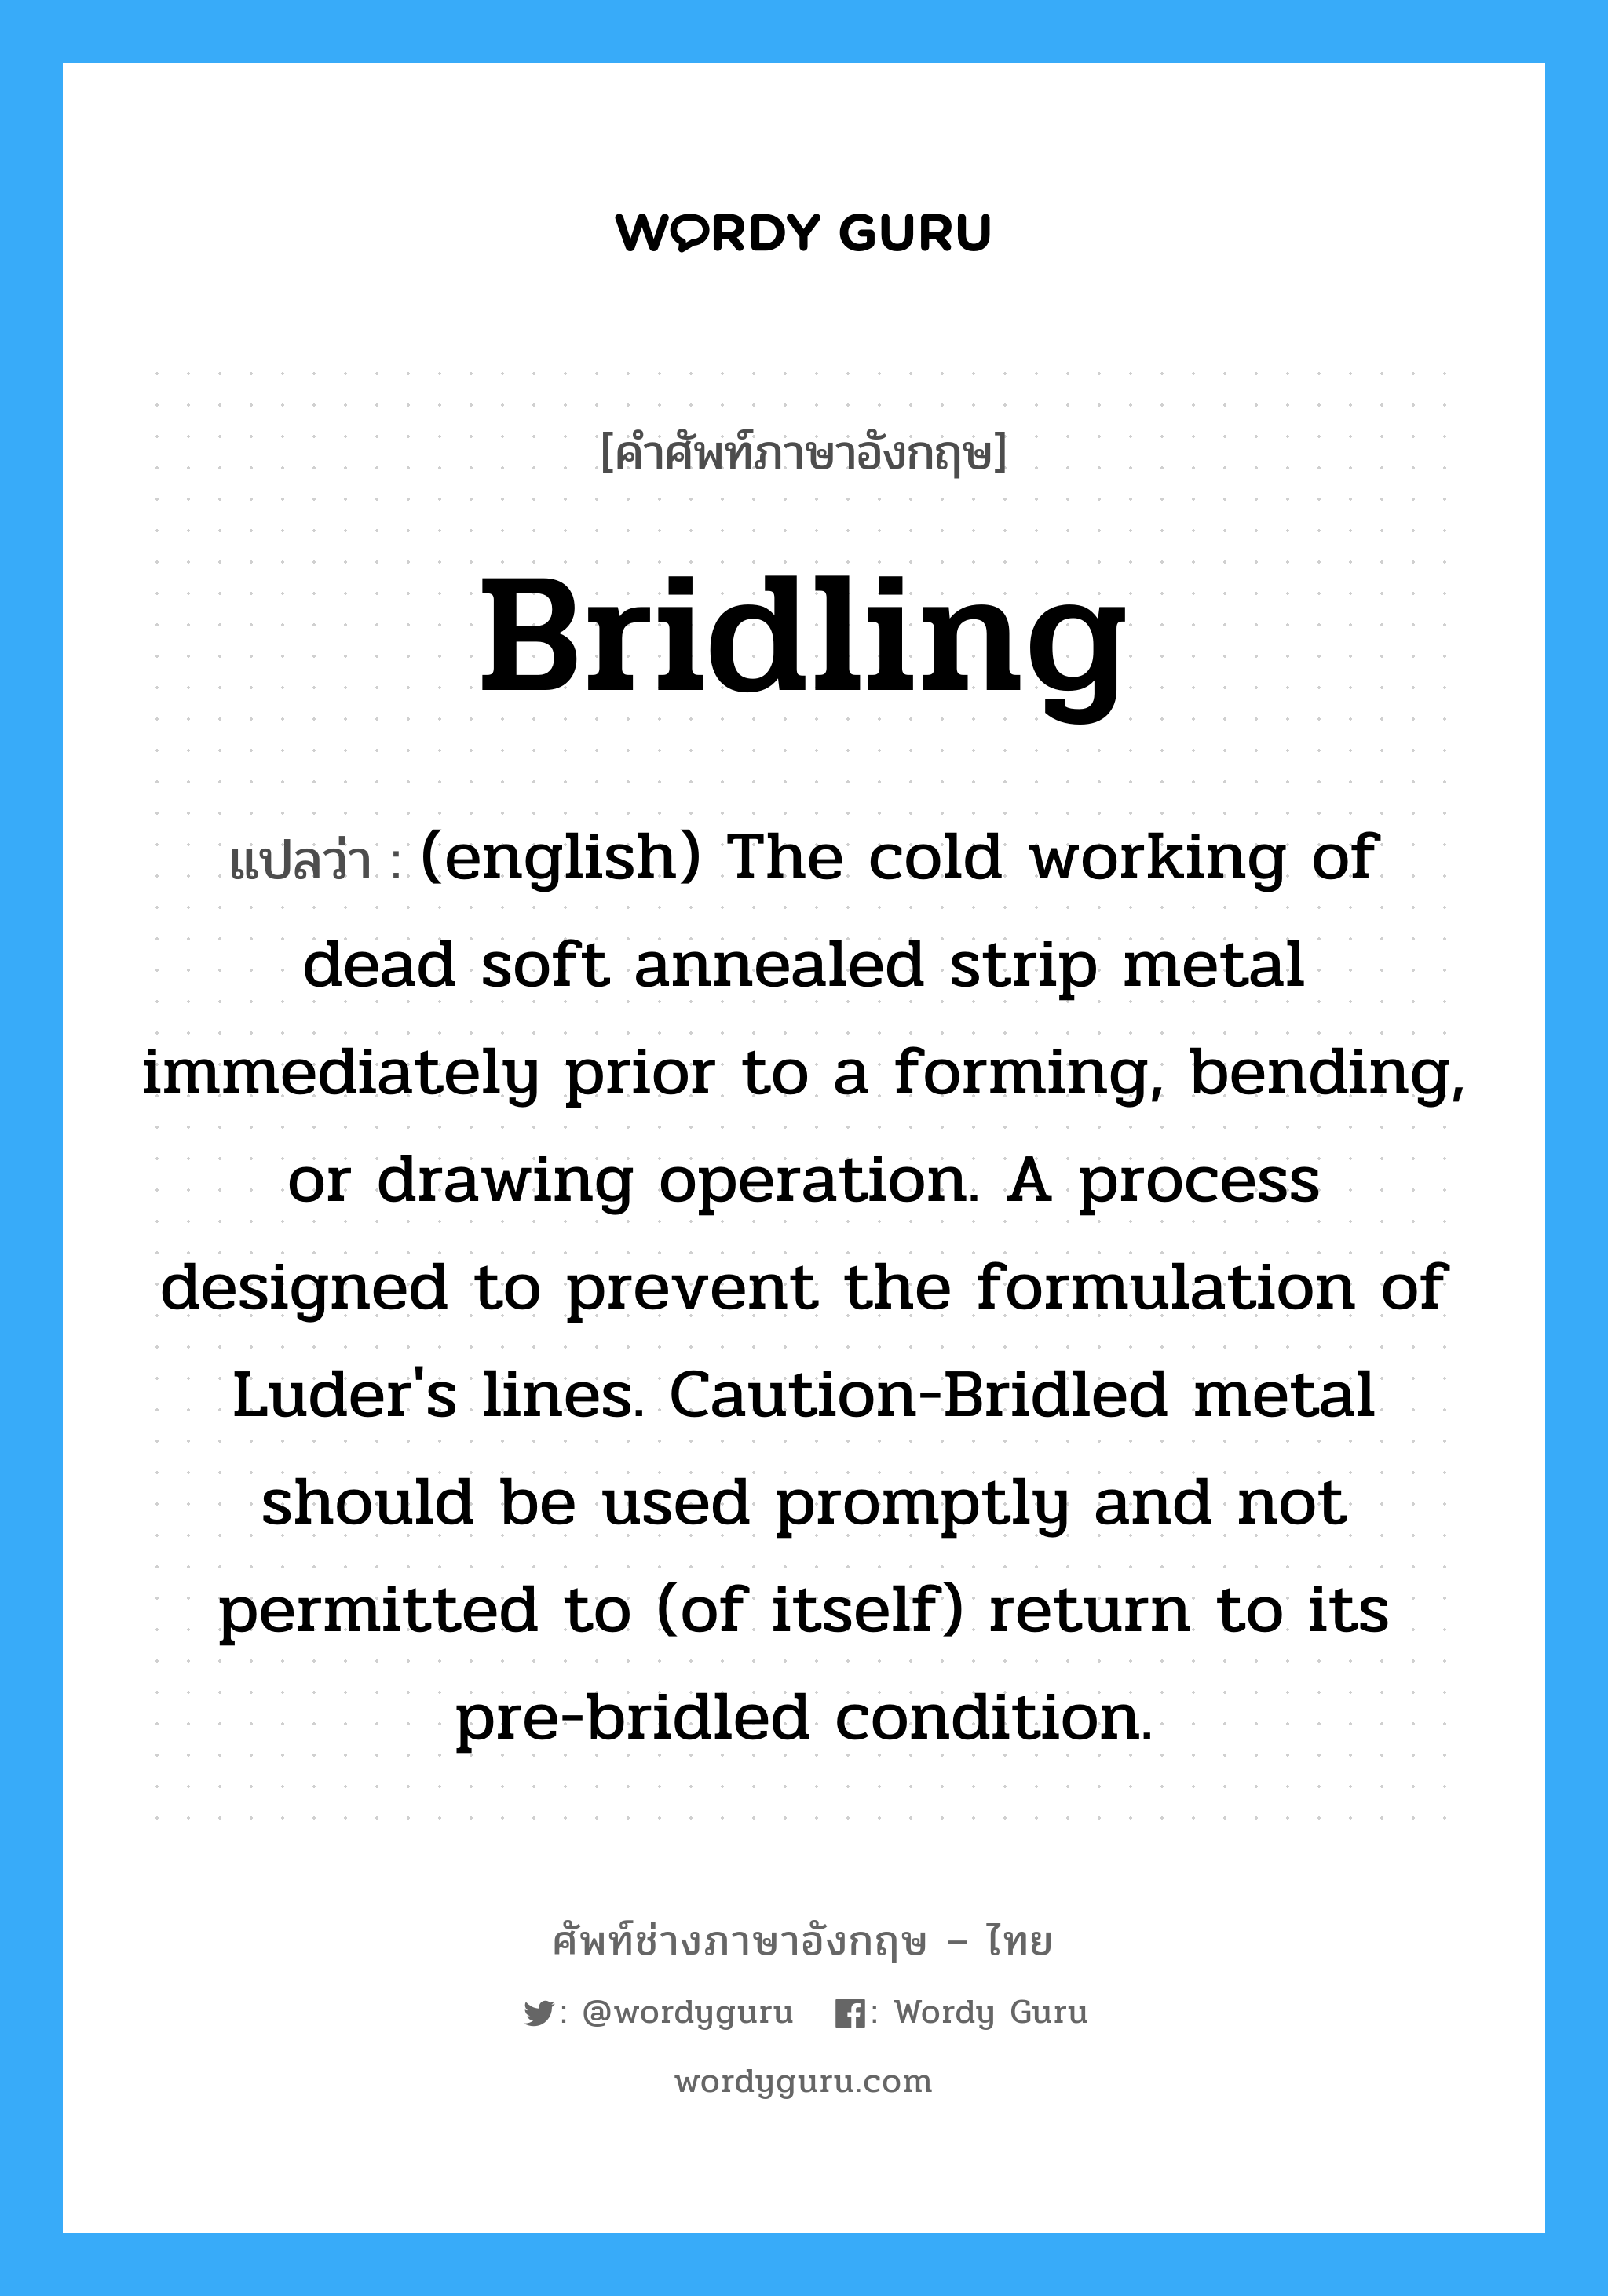 Bridling แปลว่า?, คำศัพท์ช่างภาษาอังกฤษ - ไทย Bridling คำศัพท์ภาษาอังกฤษ Bridling แปลว่า (english) The cold working of dead soft annealed strip metal immediately prior to a forming, bending, or drawing operation. A process designed to prevent the formulation of Luder's lines. Caution-Bridled metal should be used promptly and not permitted to (of itself) return to its pre-bridled condition.